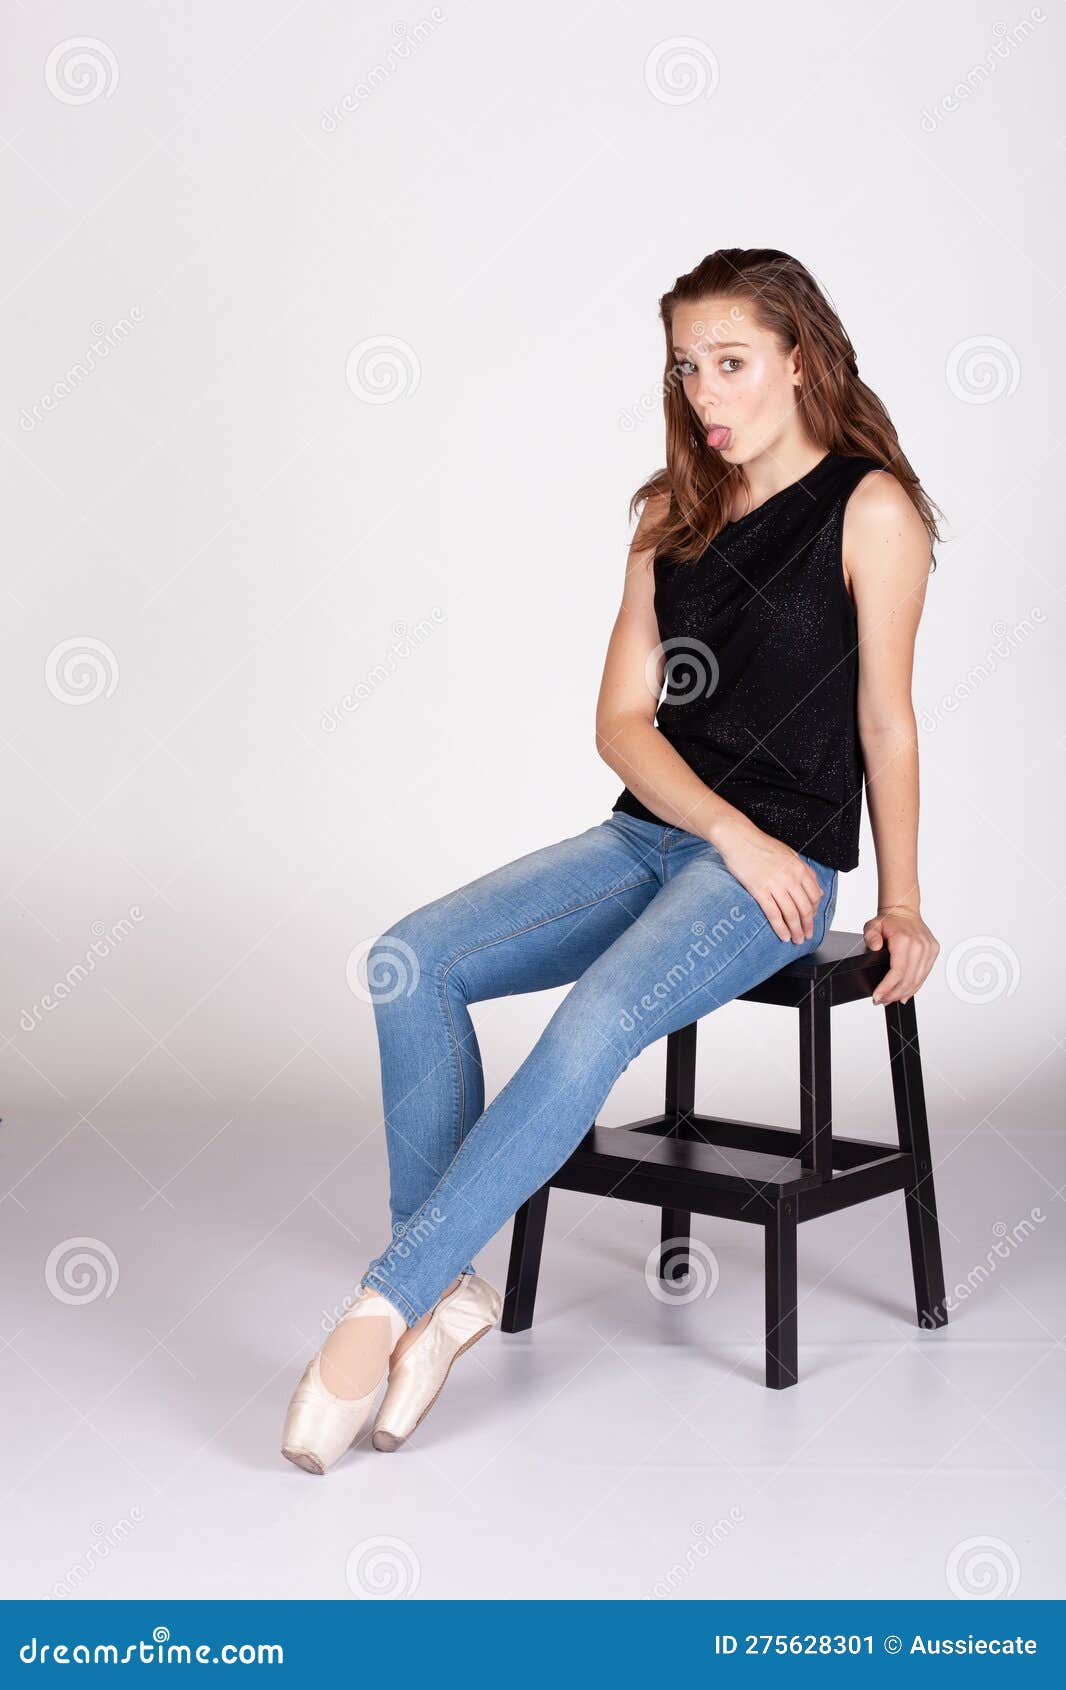 en pointe resting on stool legs extended tounge out